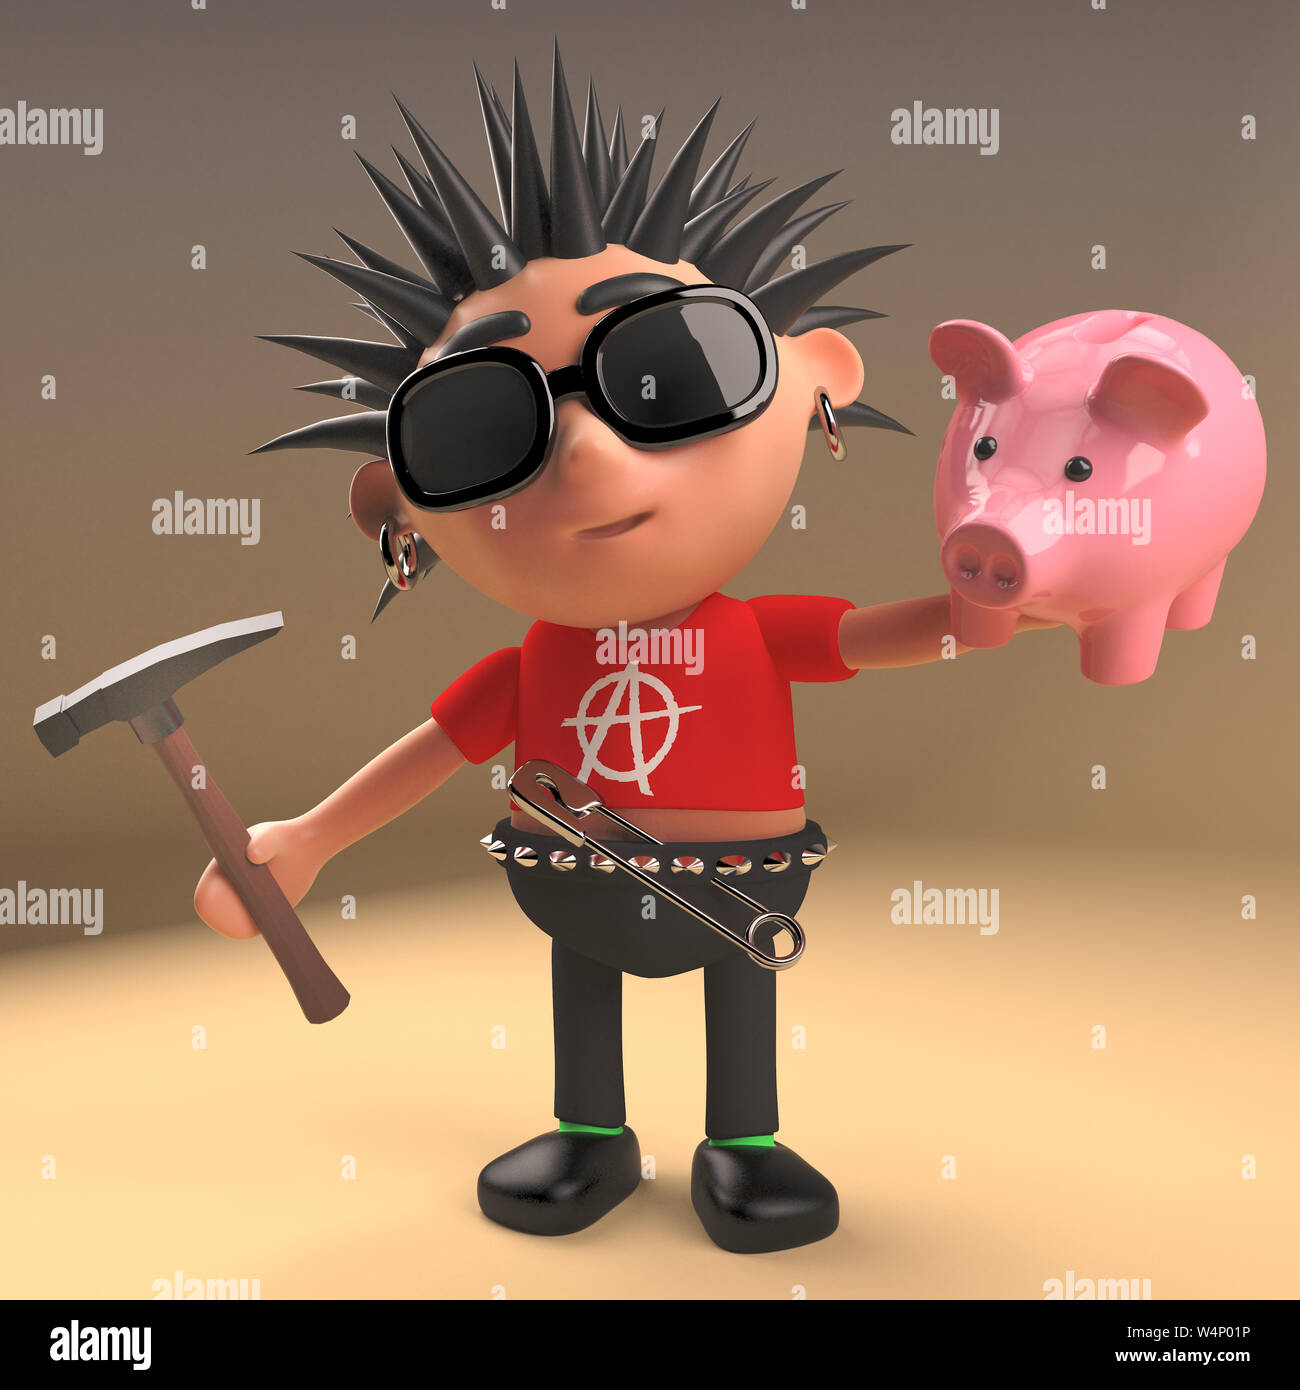 Poor punk rock cartoon character about to smash piggy bank with hammer, 3d illustration render Stock Photo